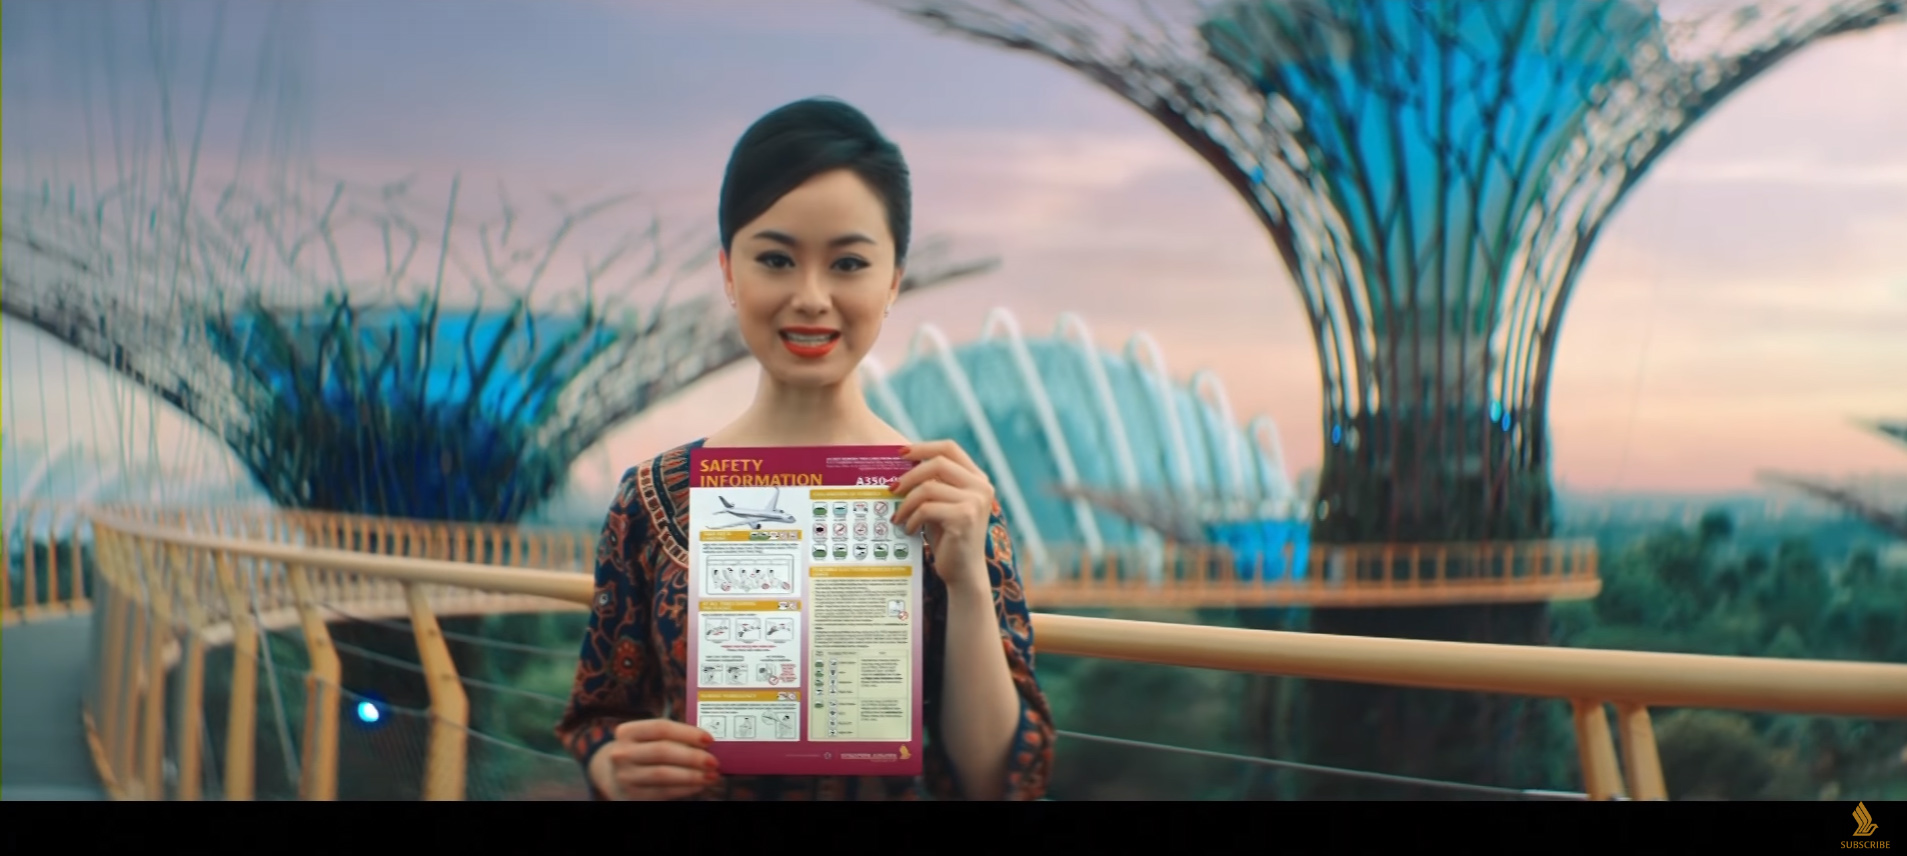 singapore-airlines-new-in-flight-safety-video-inspired-by-qantas-and-air-new-zealand